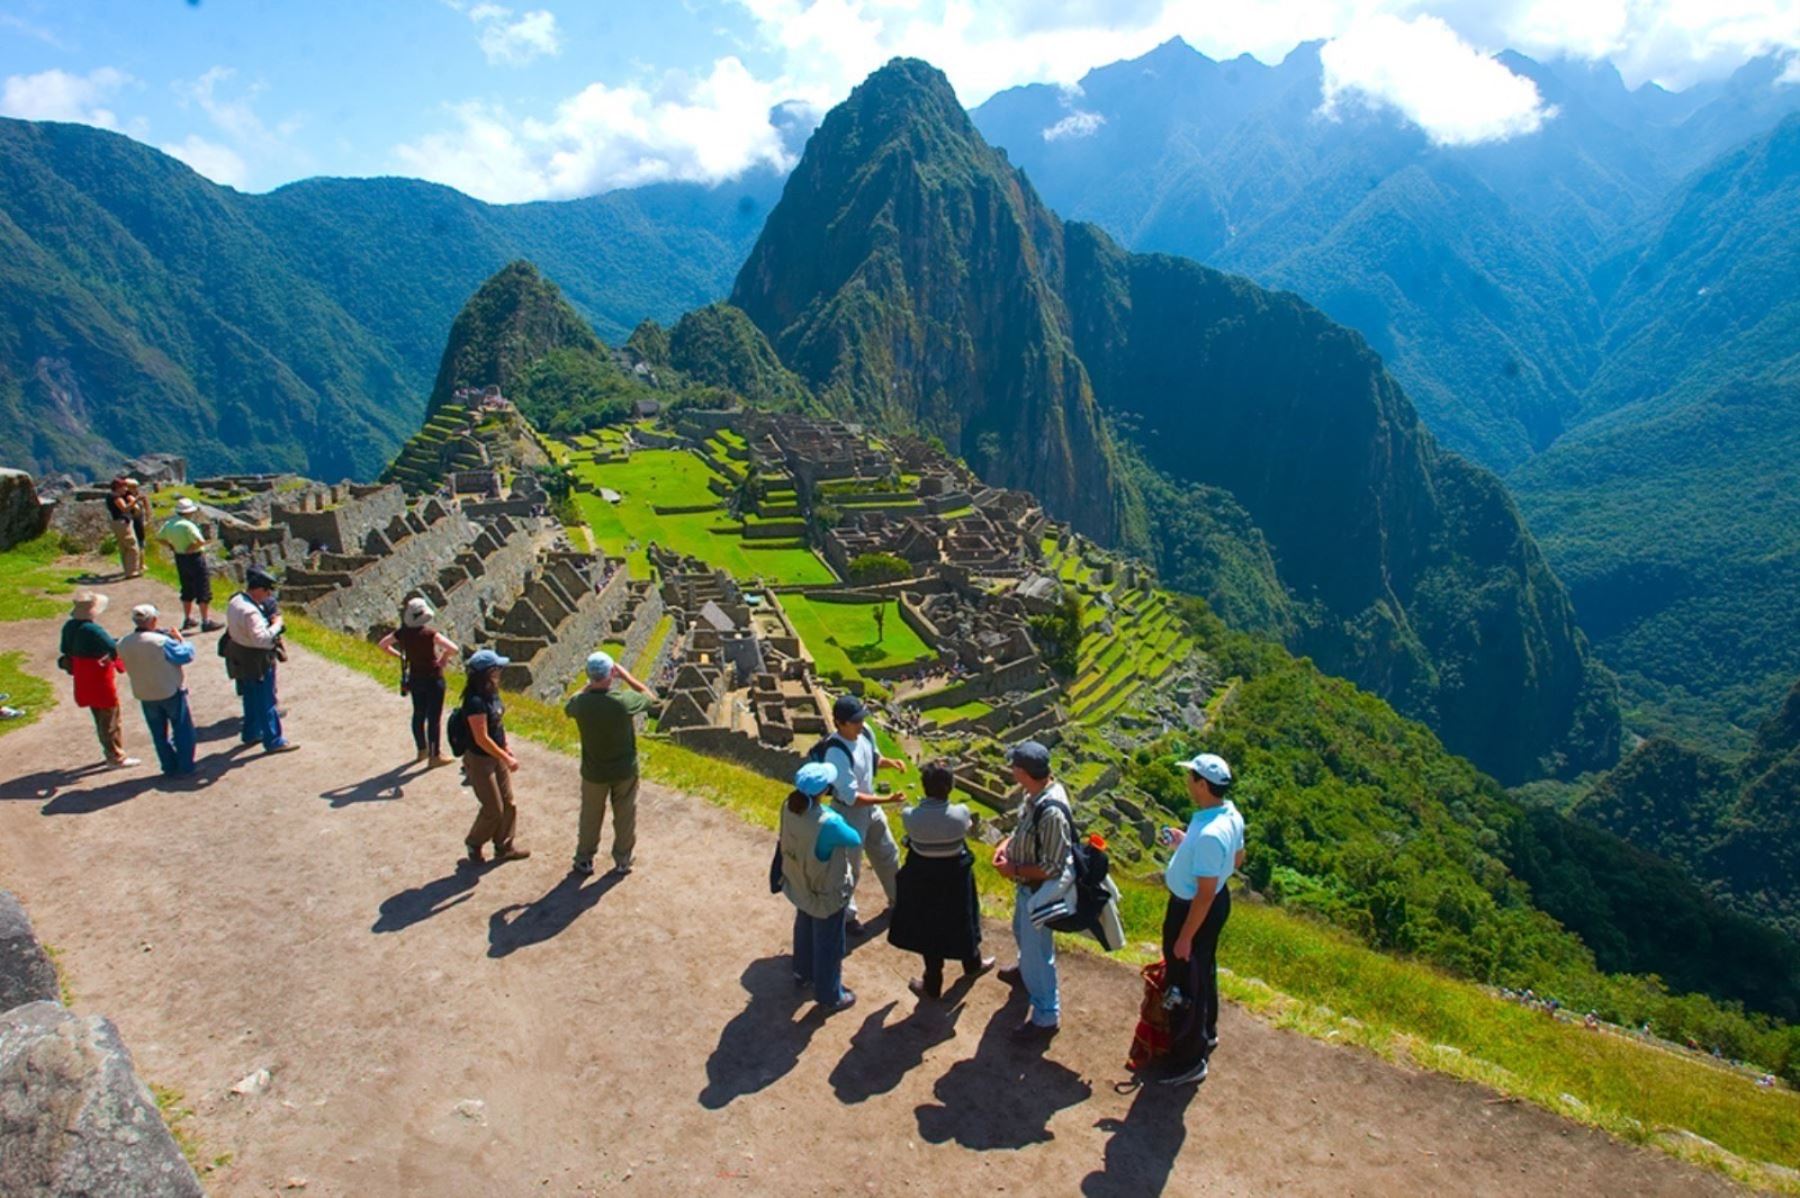 Peru aims to become Latin America’s top tourist destination by 2030